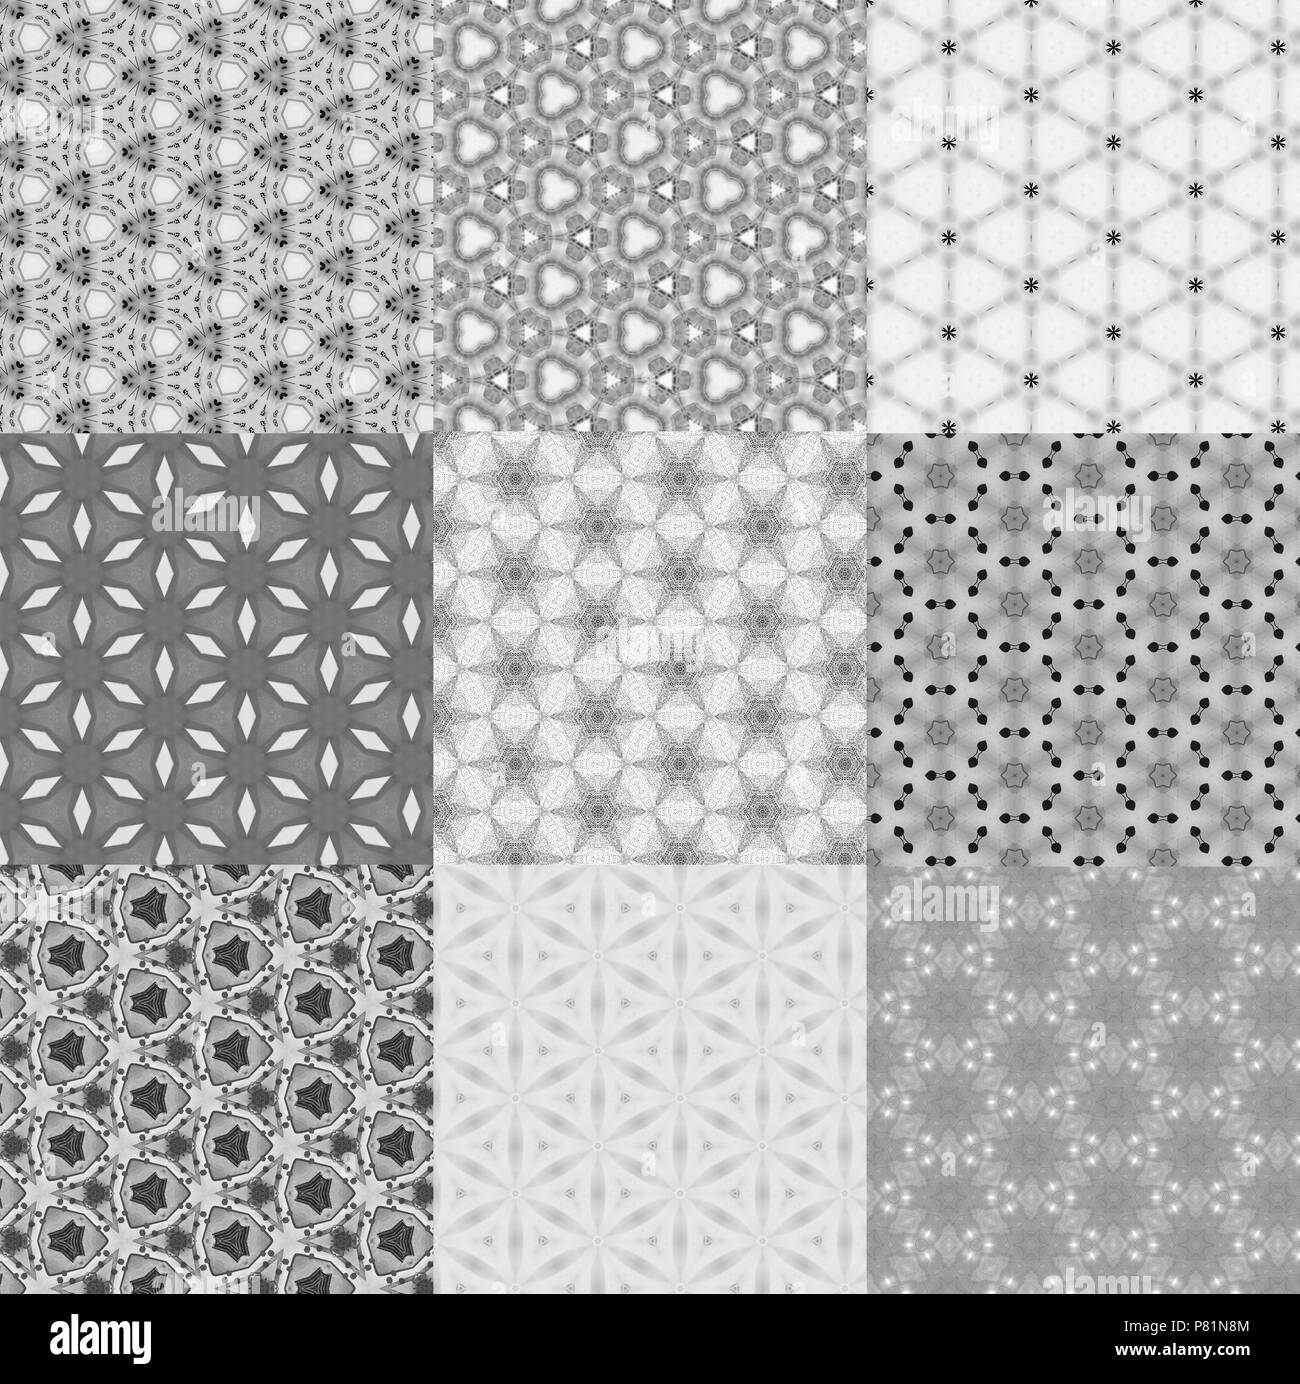 Abstract pattern design background from geometric shape, You can use this pattern background for your fabric pattern or interior wallpaper pattern. Stock Photo